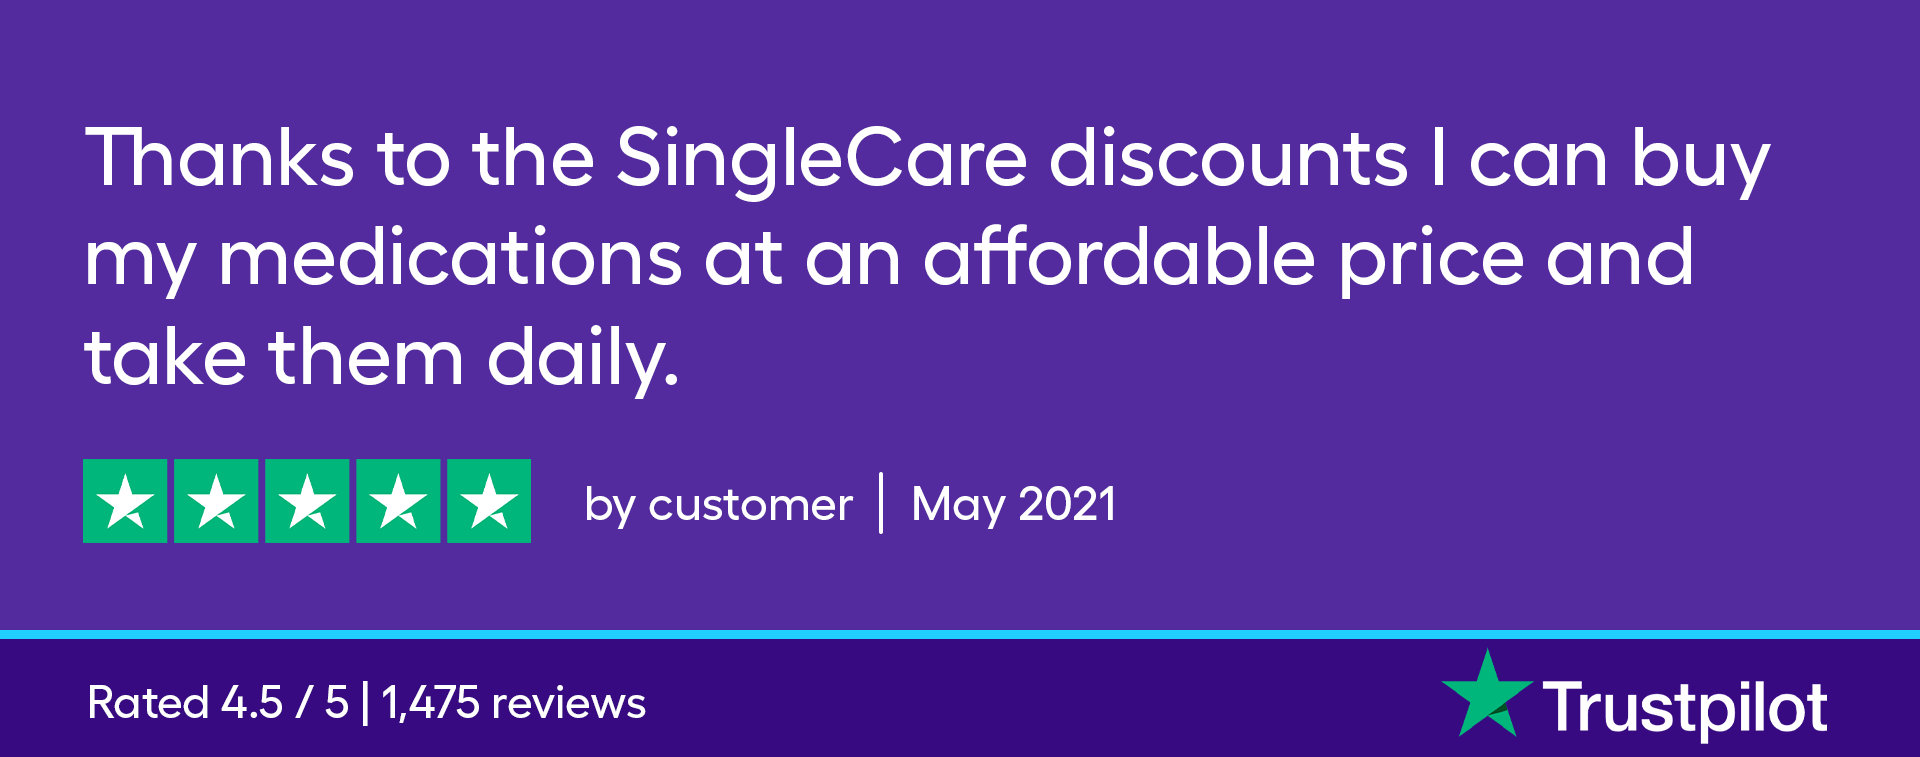 Thanks to the SingleCare discounts, I can buy my medications at an affordable price and take them daily.